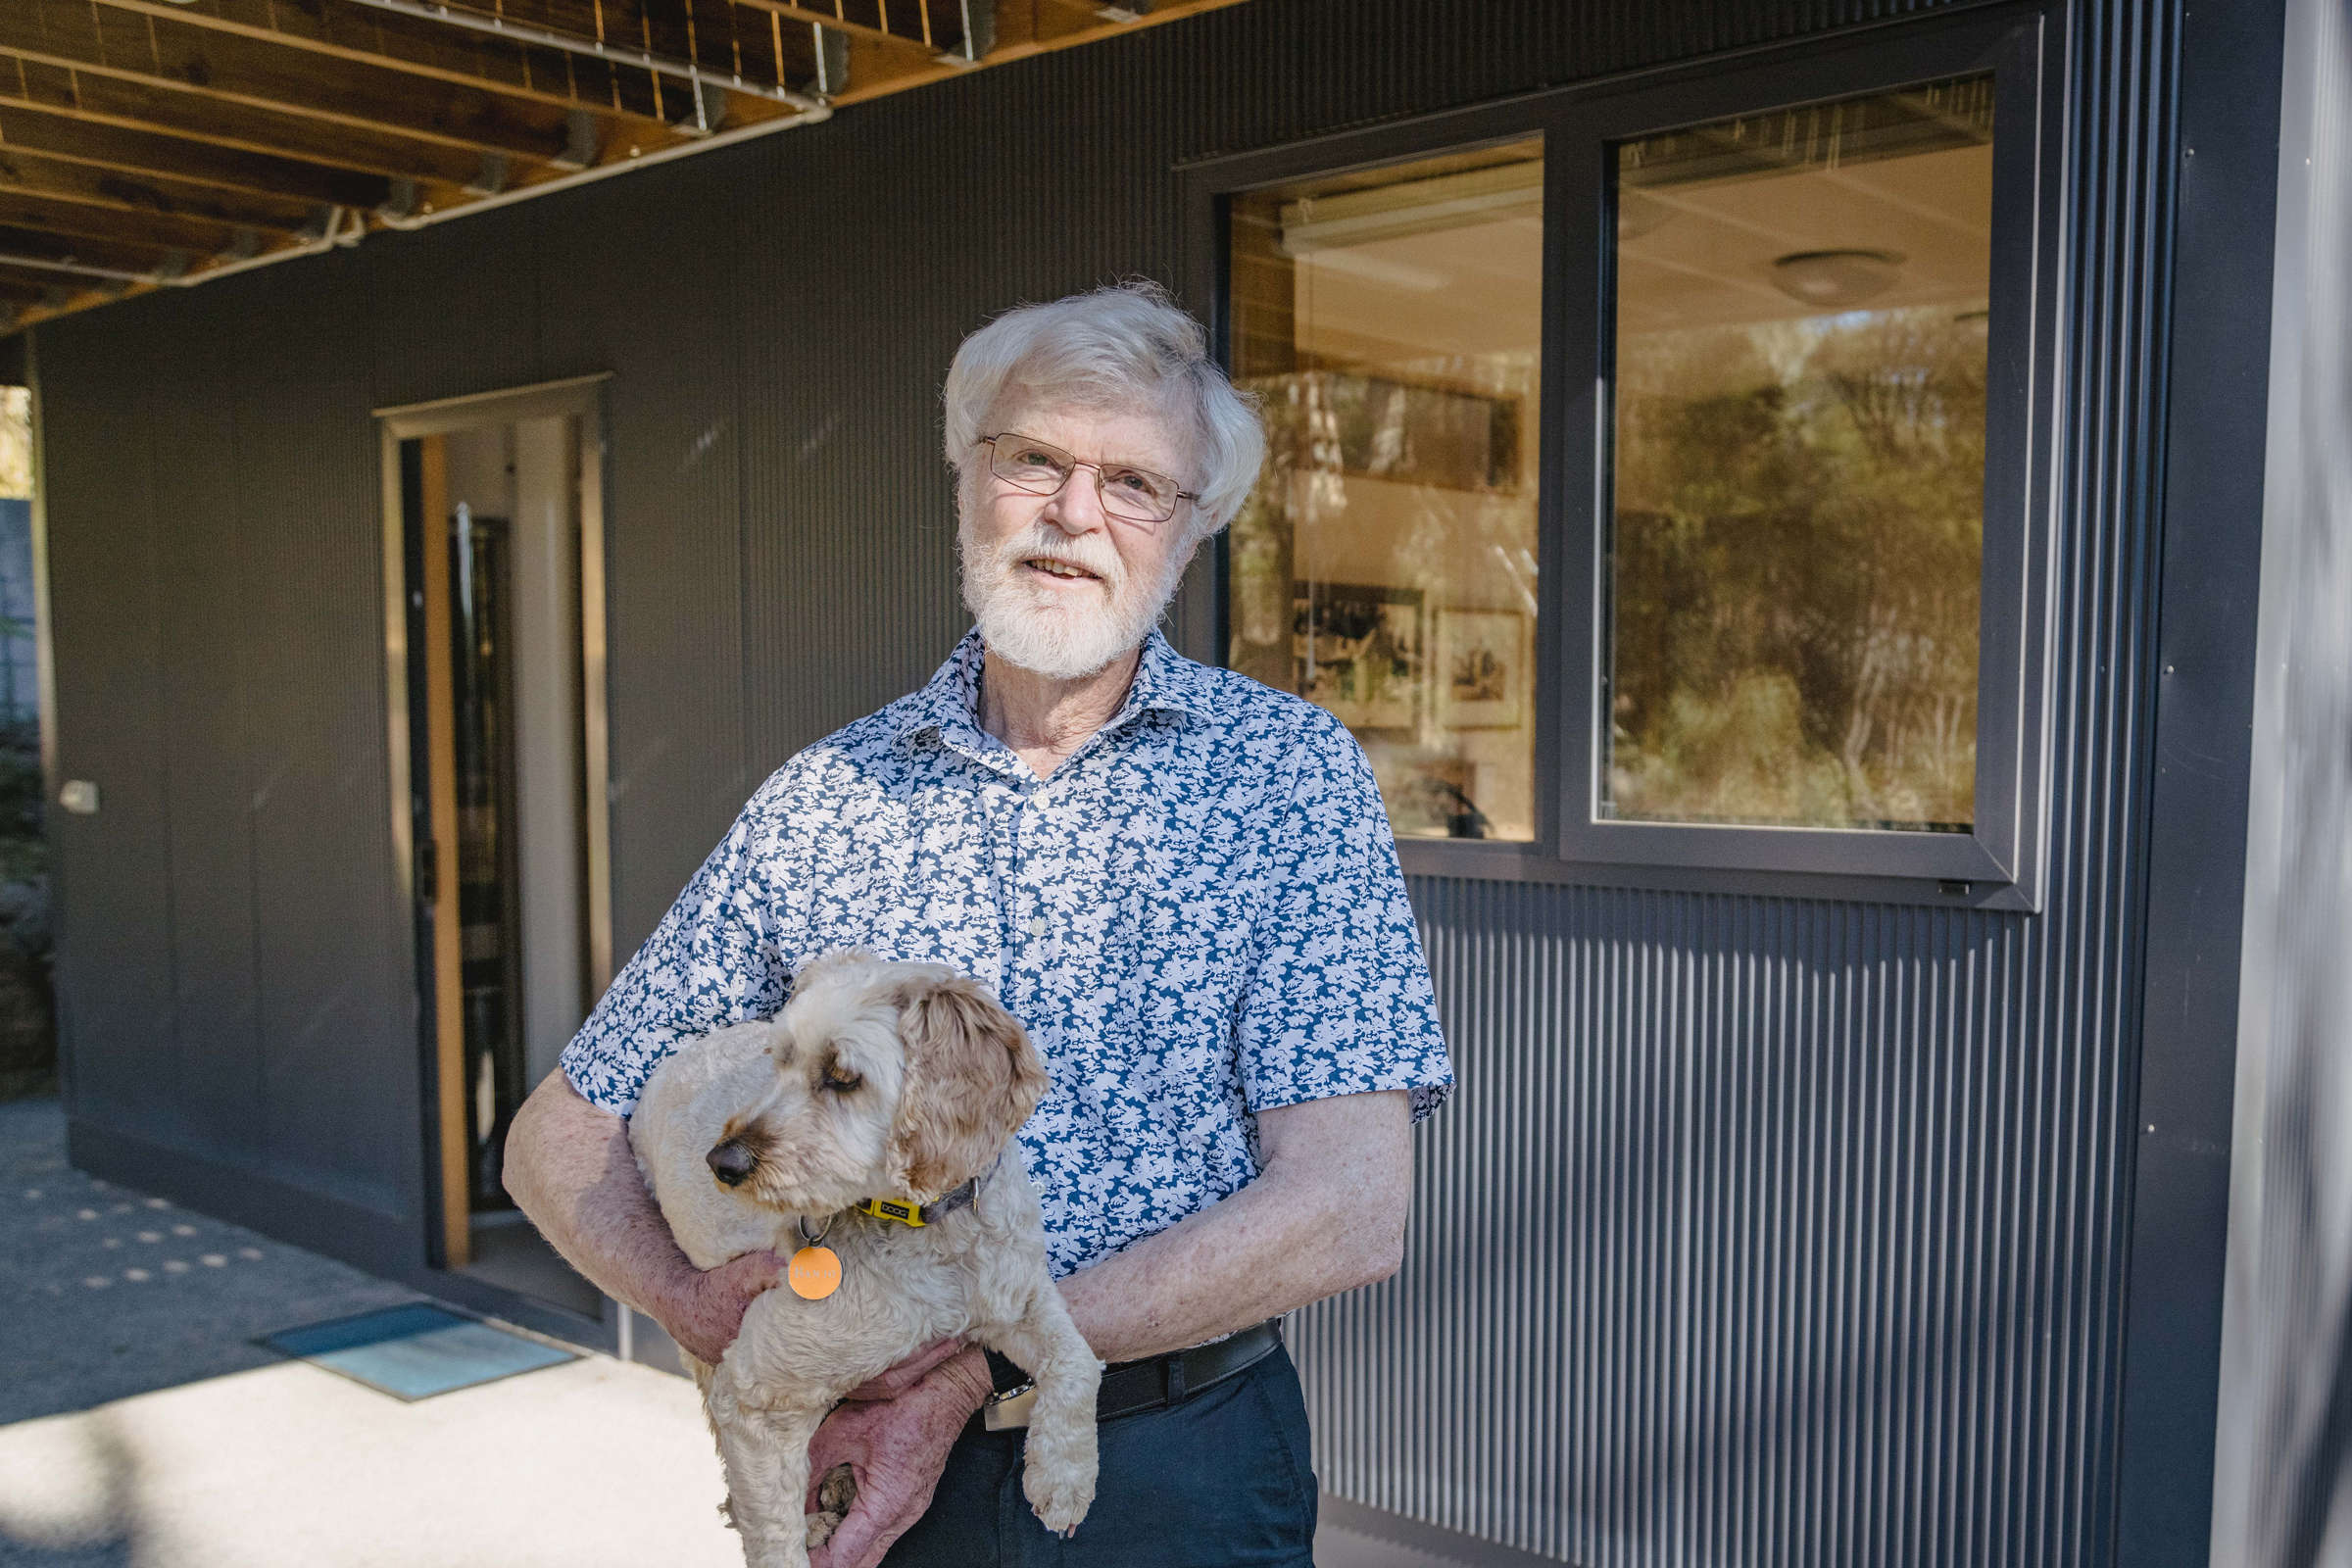 A very happy client holding their cute dog outside the renovated lower level of the house. Externally, the renovation features custom mini orb, double glazed and thermally broken windows and a concrete path exposed aggregate. The renovation was to improve the amenity of the space under the house by building it in, creating two extra bedrooms and a usable under-house storage space. Photo: Jordan Davis.